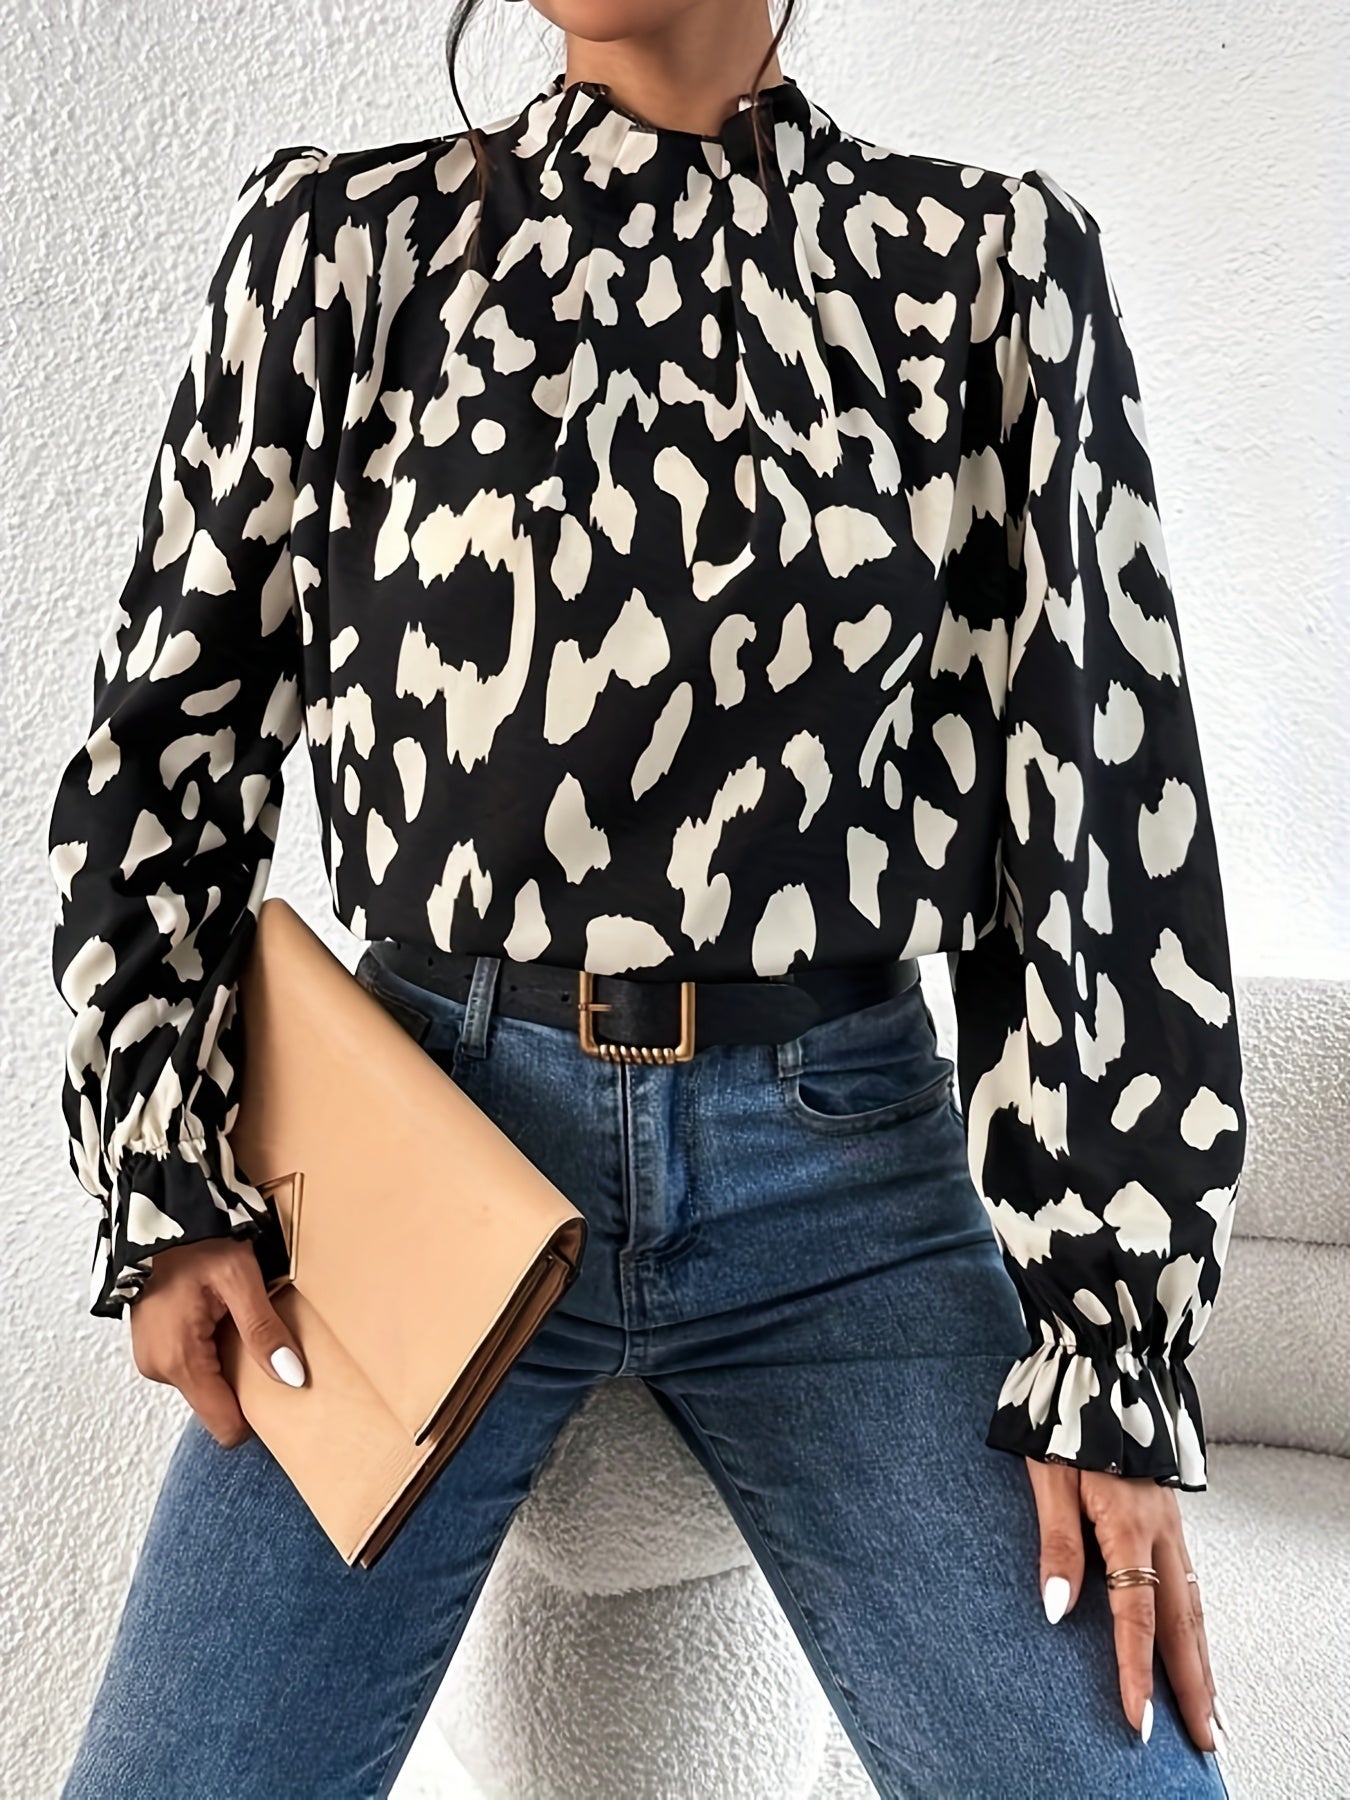 Leopard Print Keyhole Blouse, Casual High Neck Long Sleeve Blouse, Women's Clothing